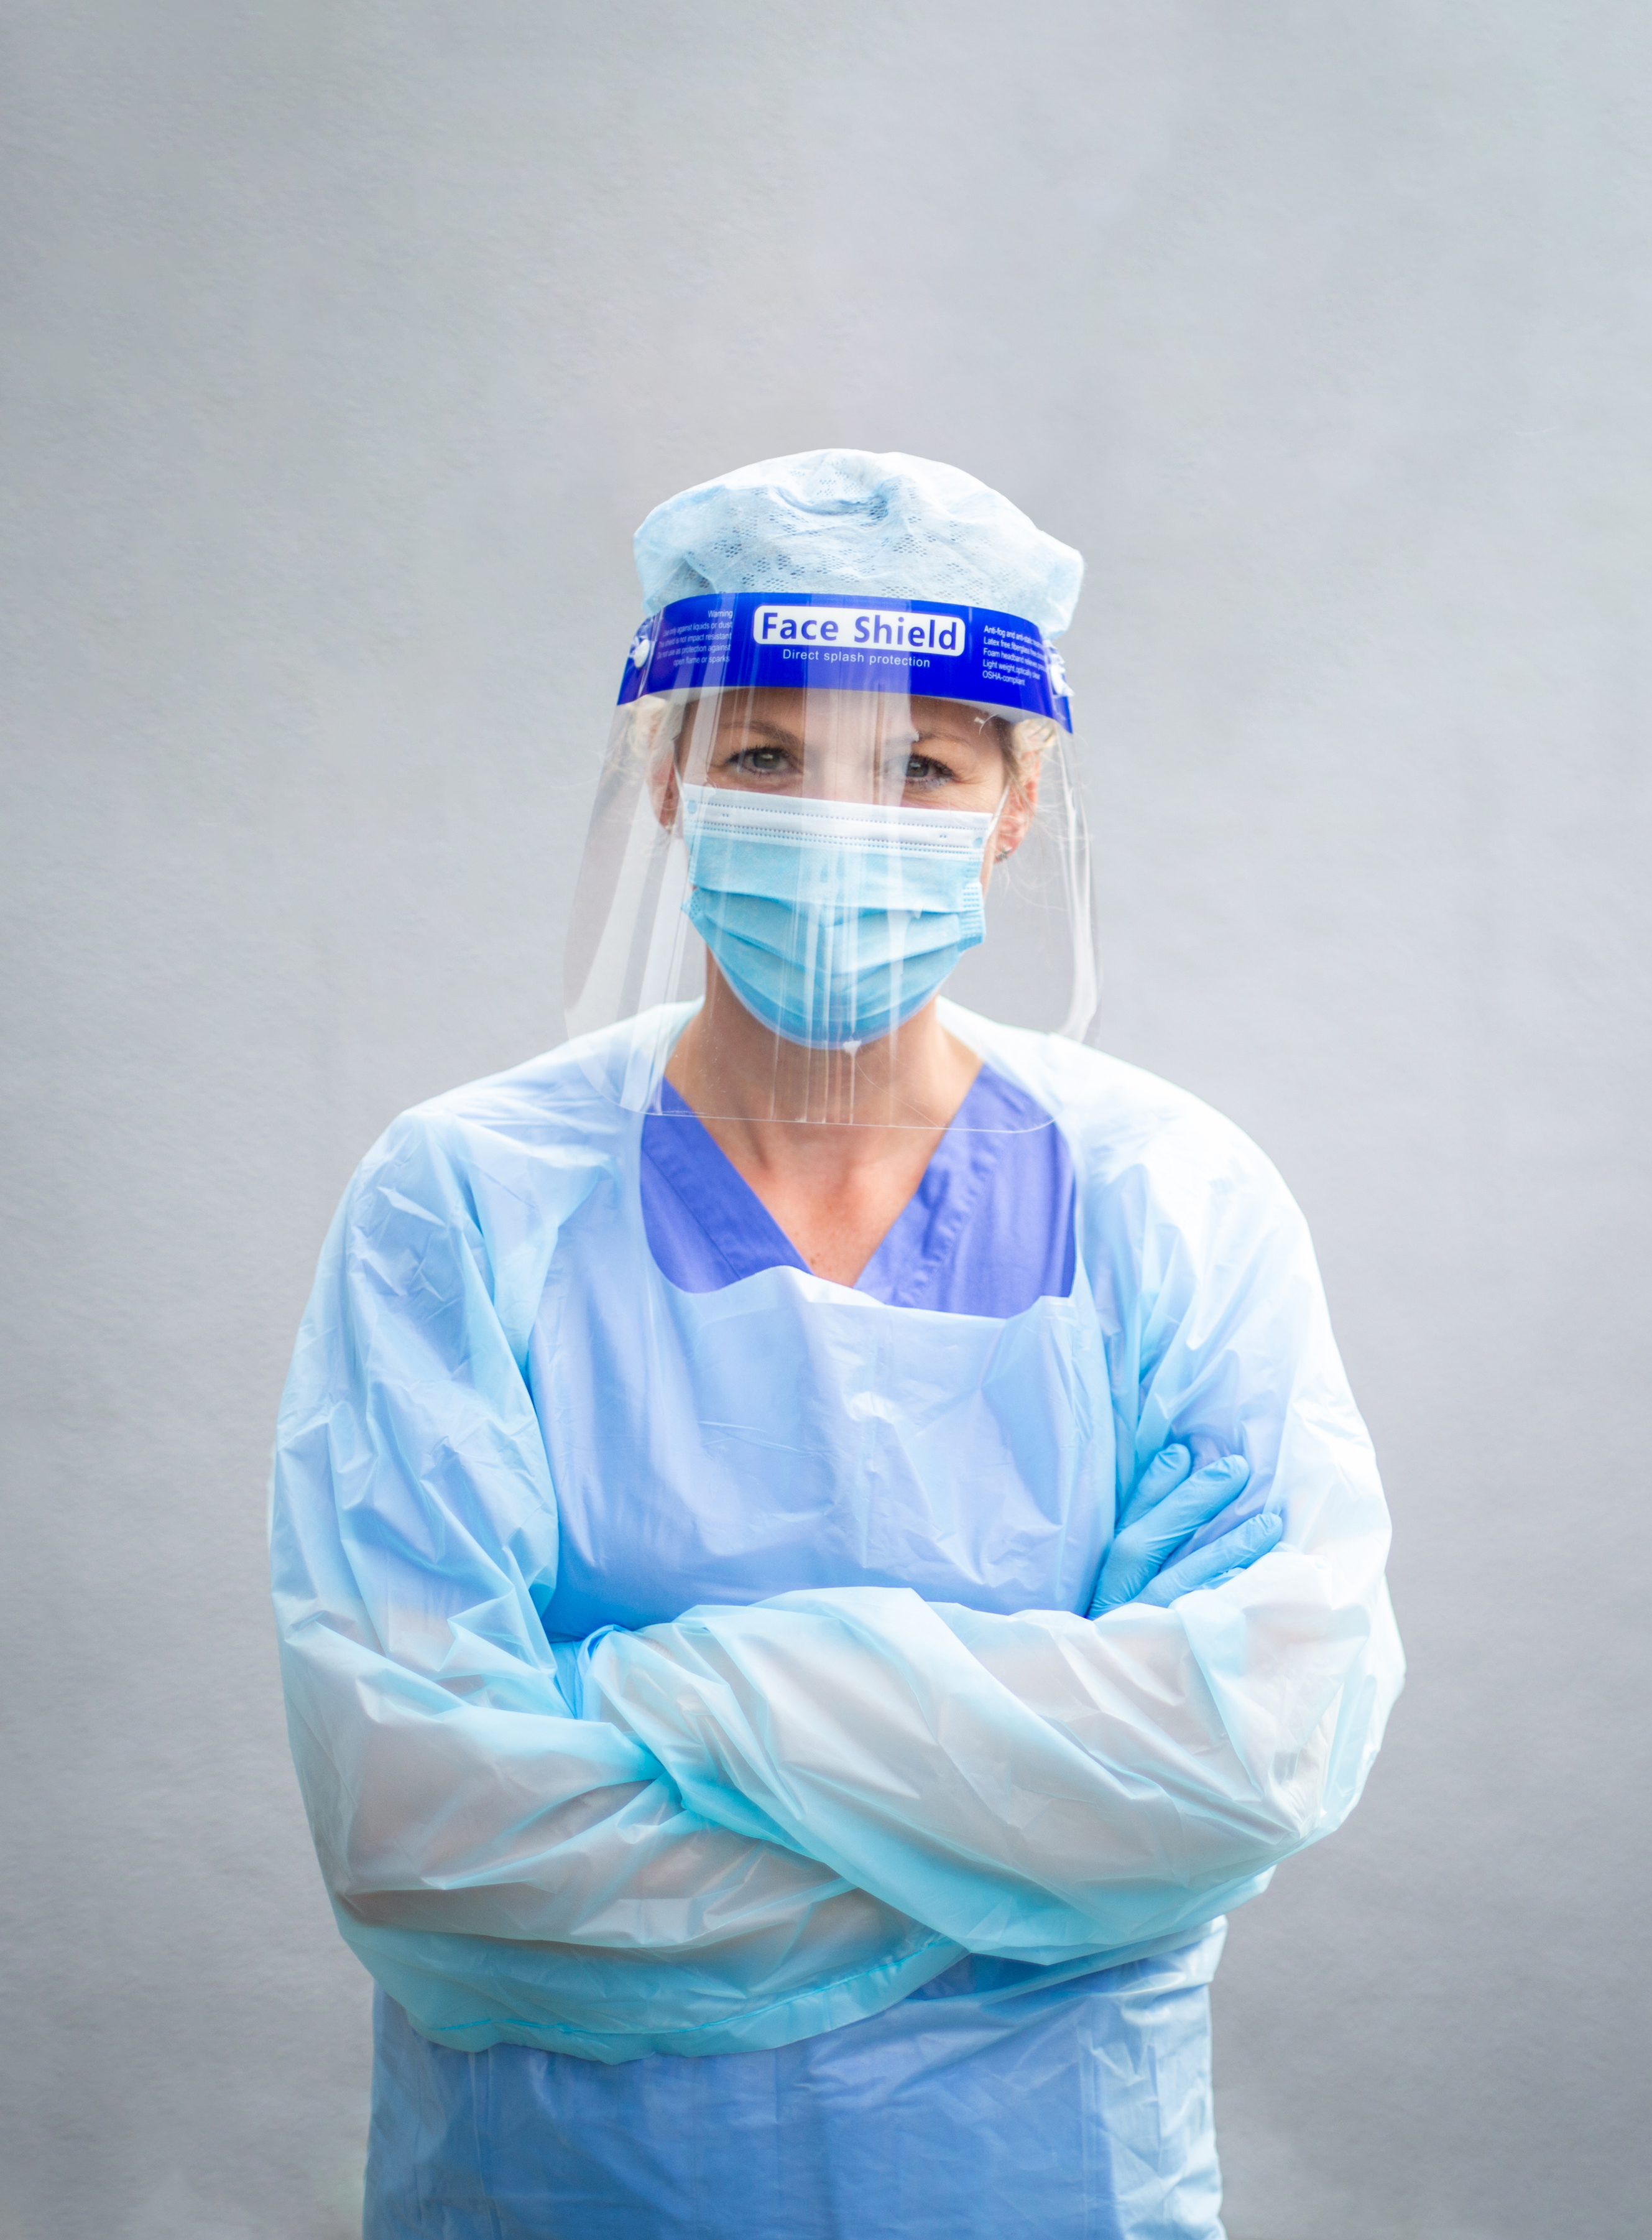 Picture from Jan Pavelka's book, showing a nurse in full ppe 